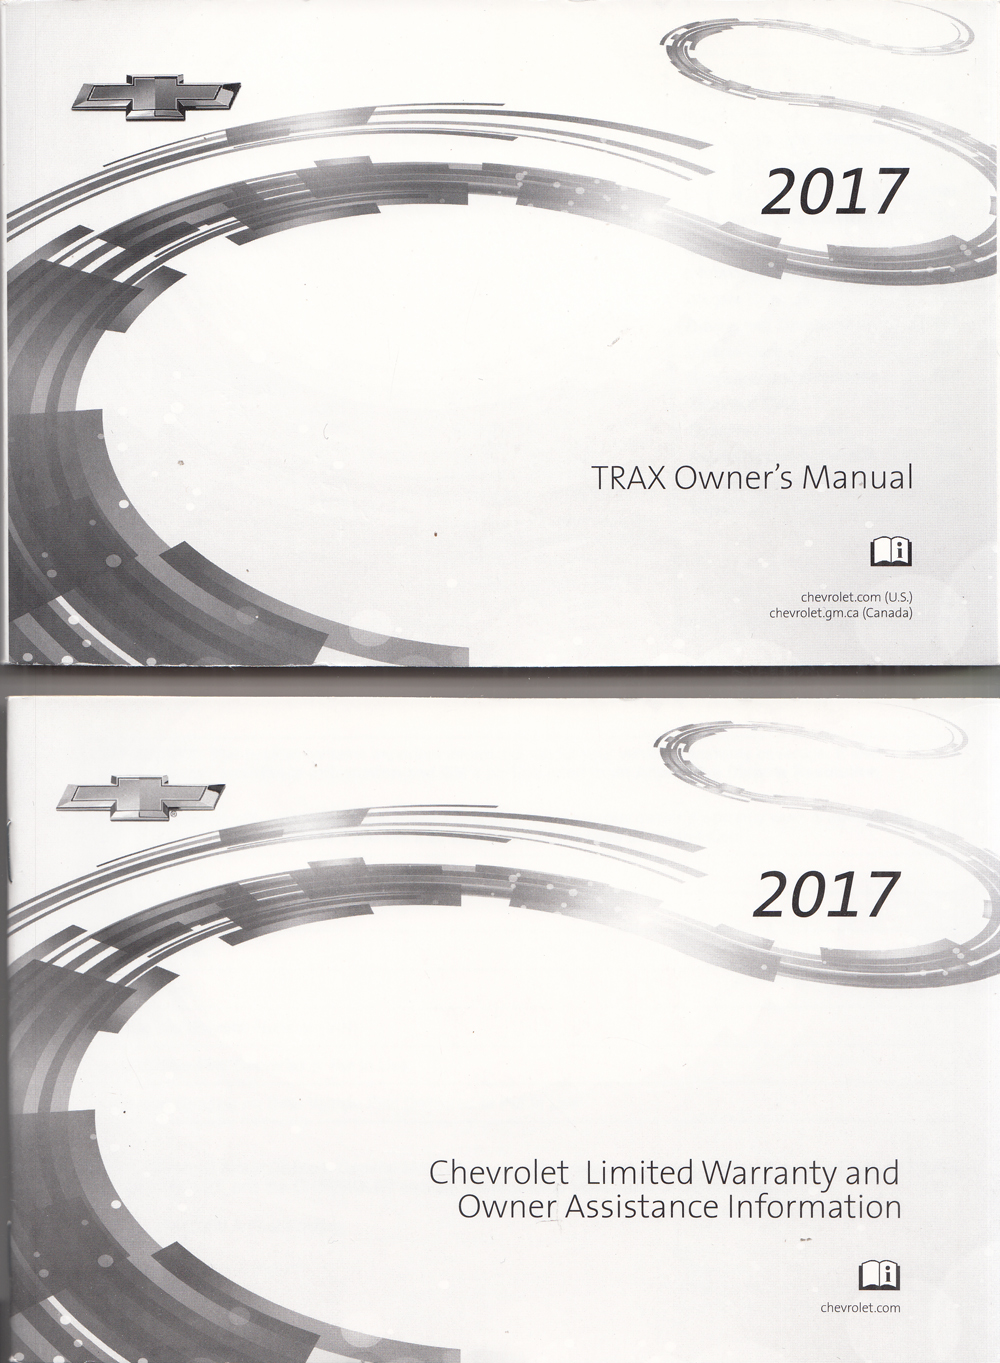 2017 Chevrolet Trax Owners Manual with Pamphlets Original